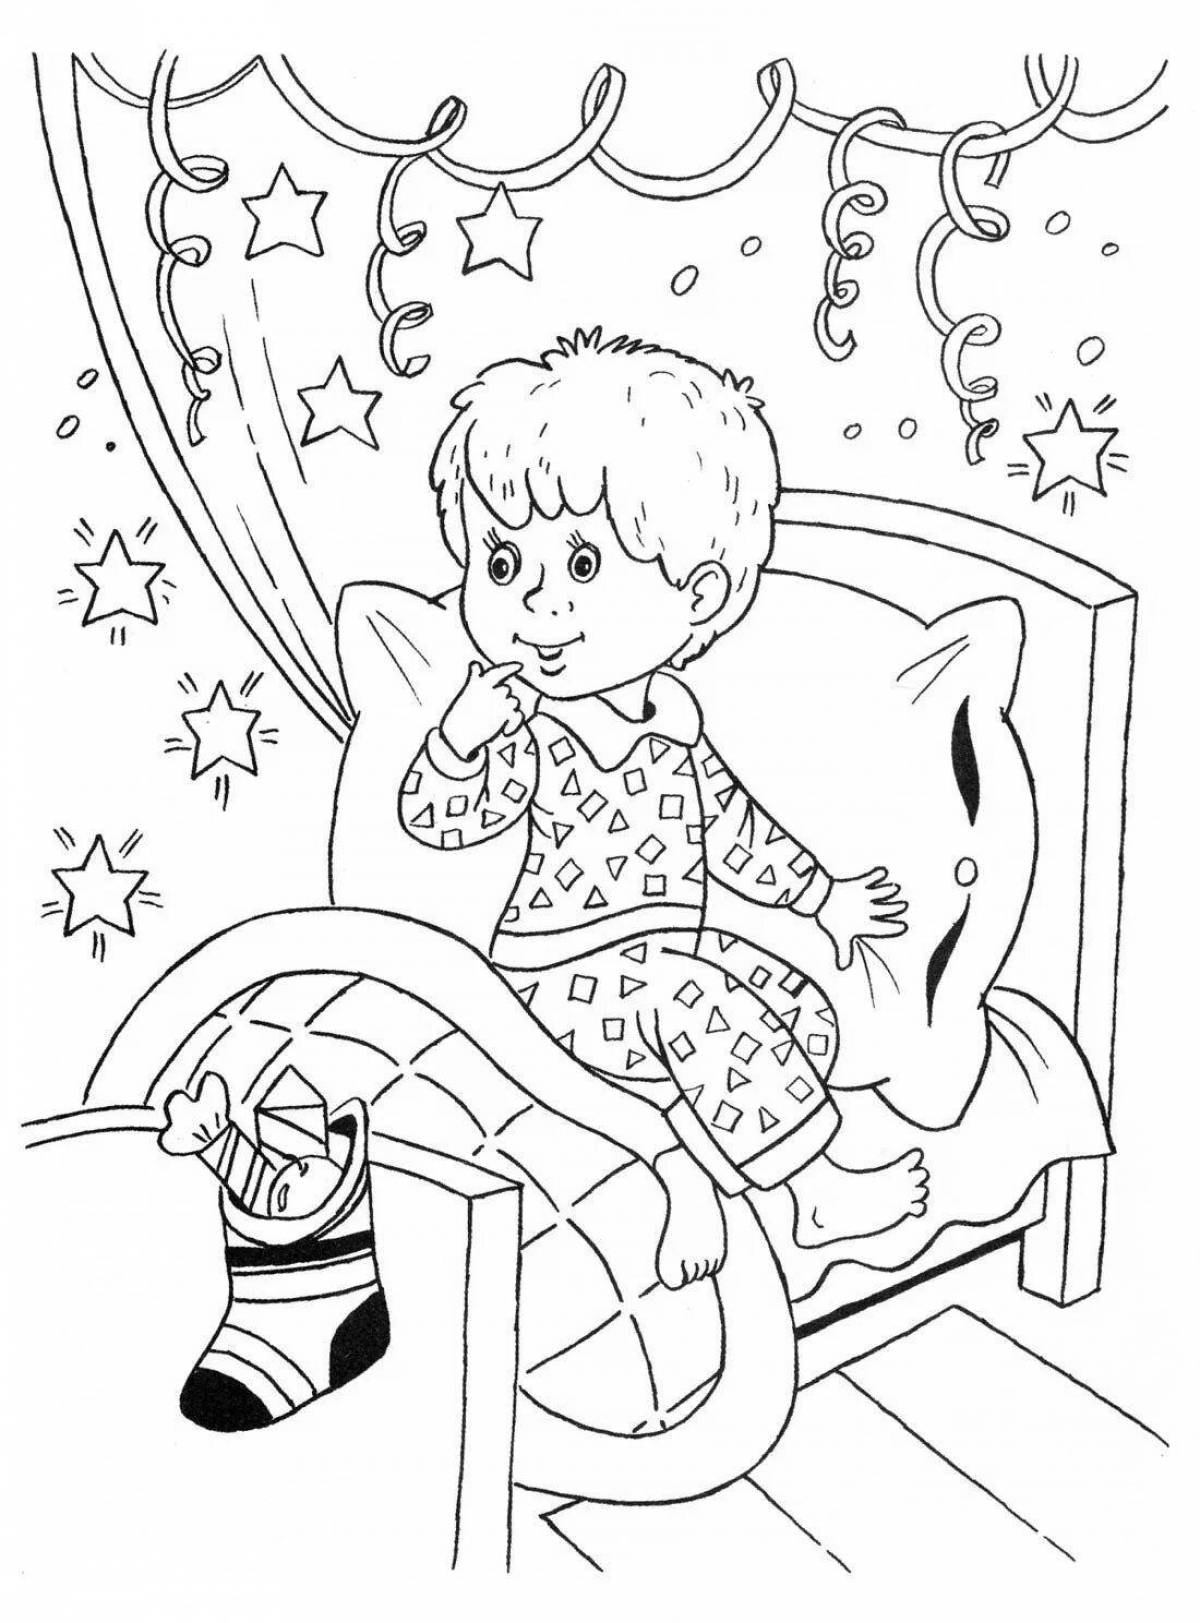 Bright coloring page why dream